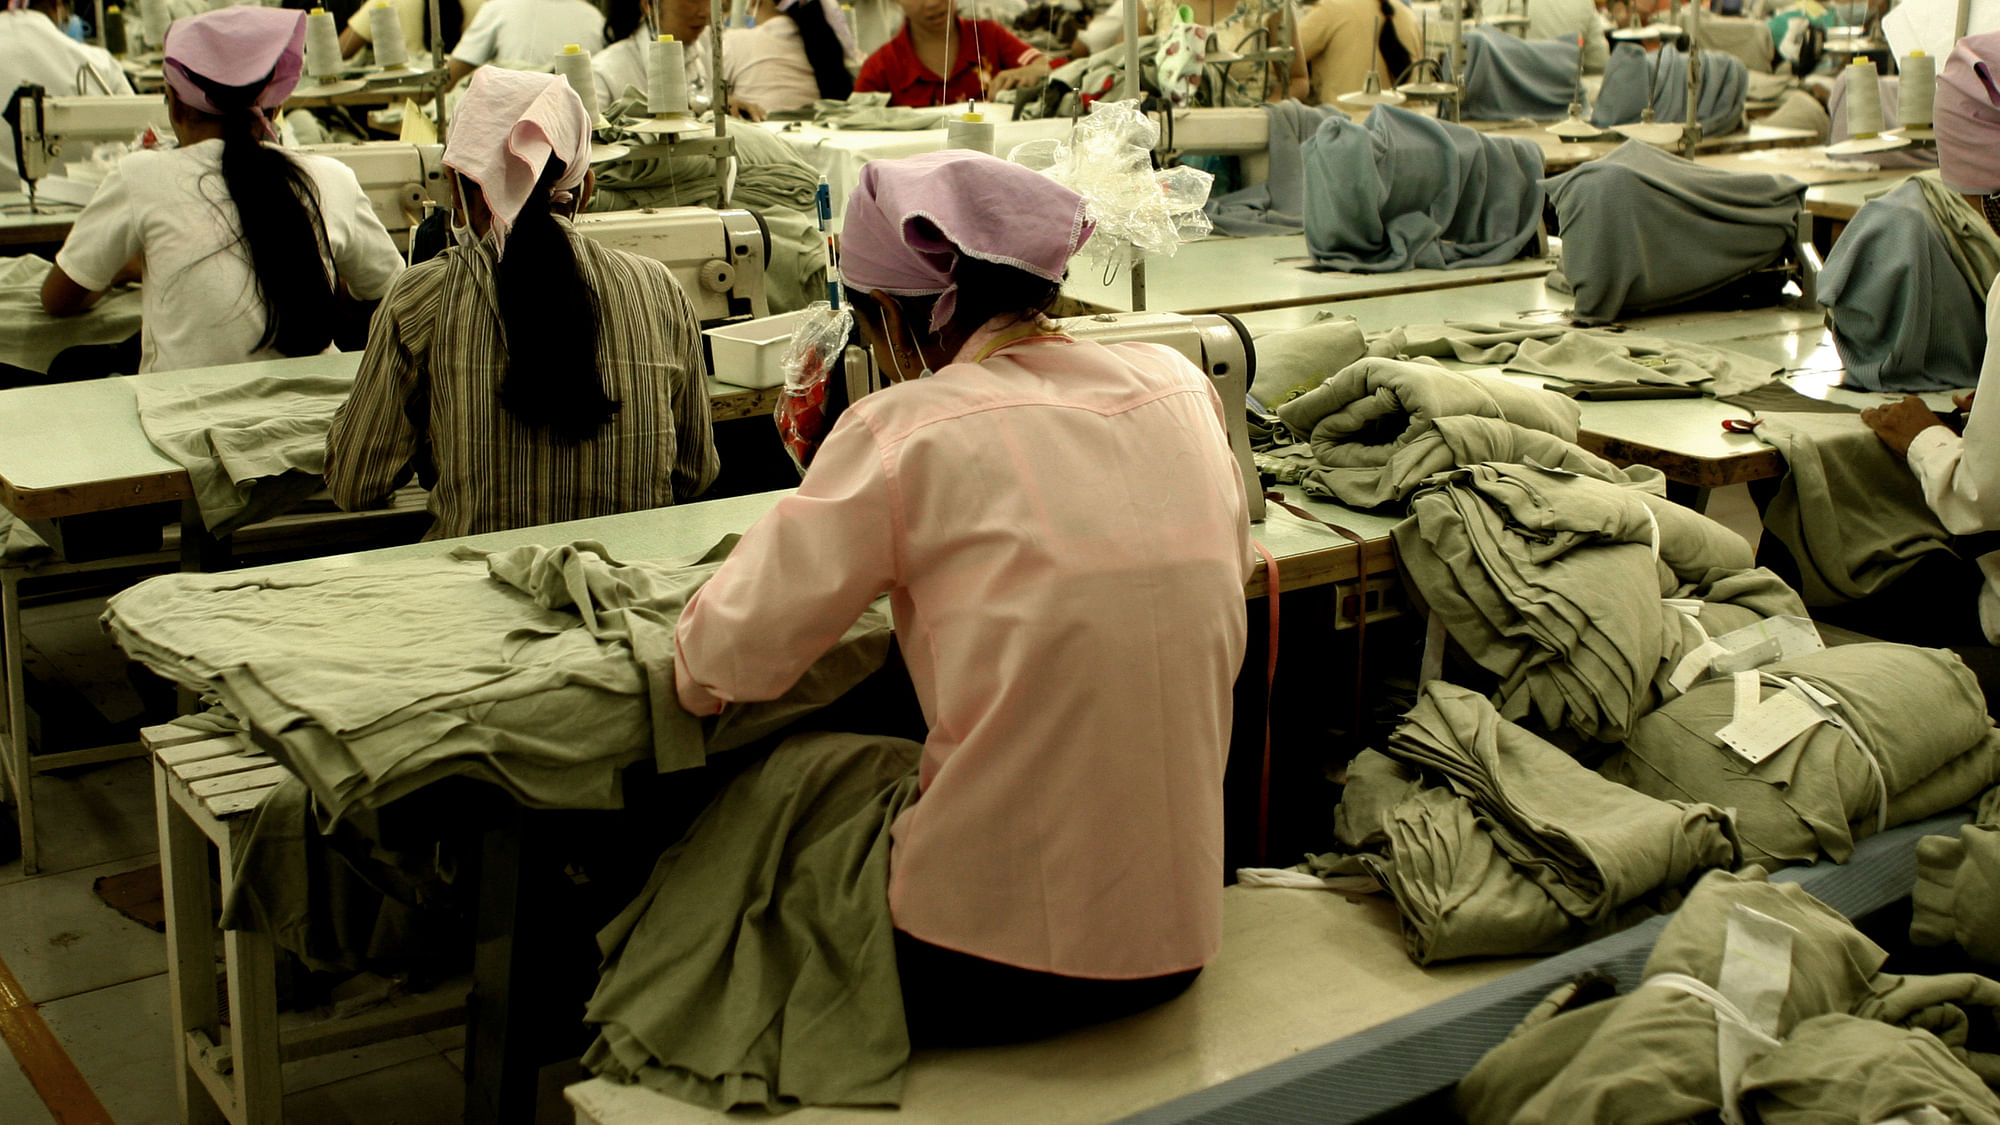 One in every seven women working in the garment industry Bengaluru have been raped or sexually abused. (Photo: Reuters)